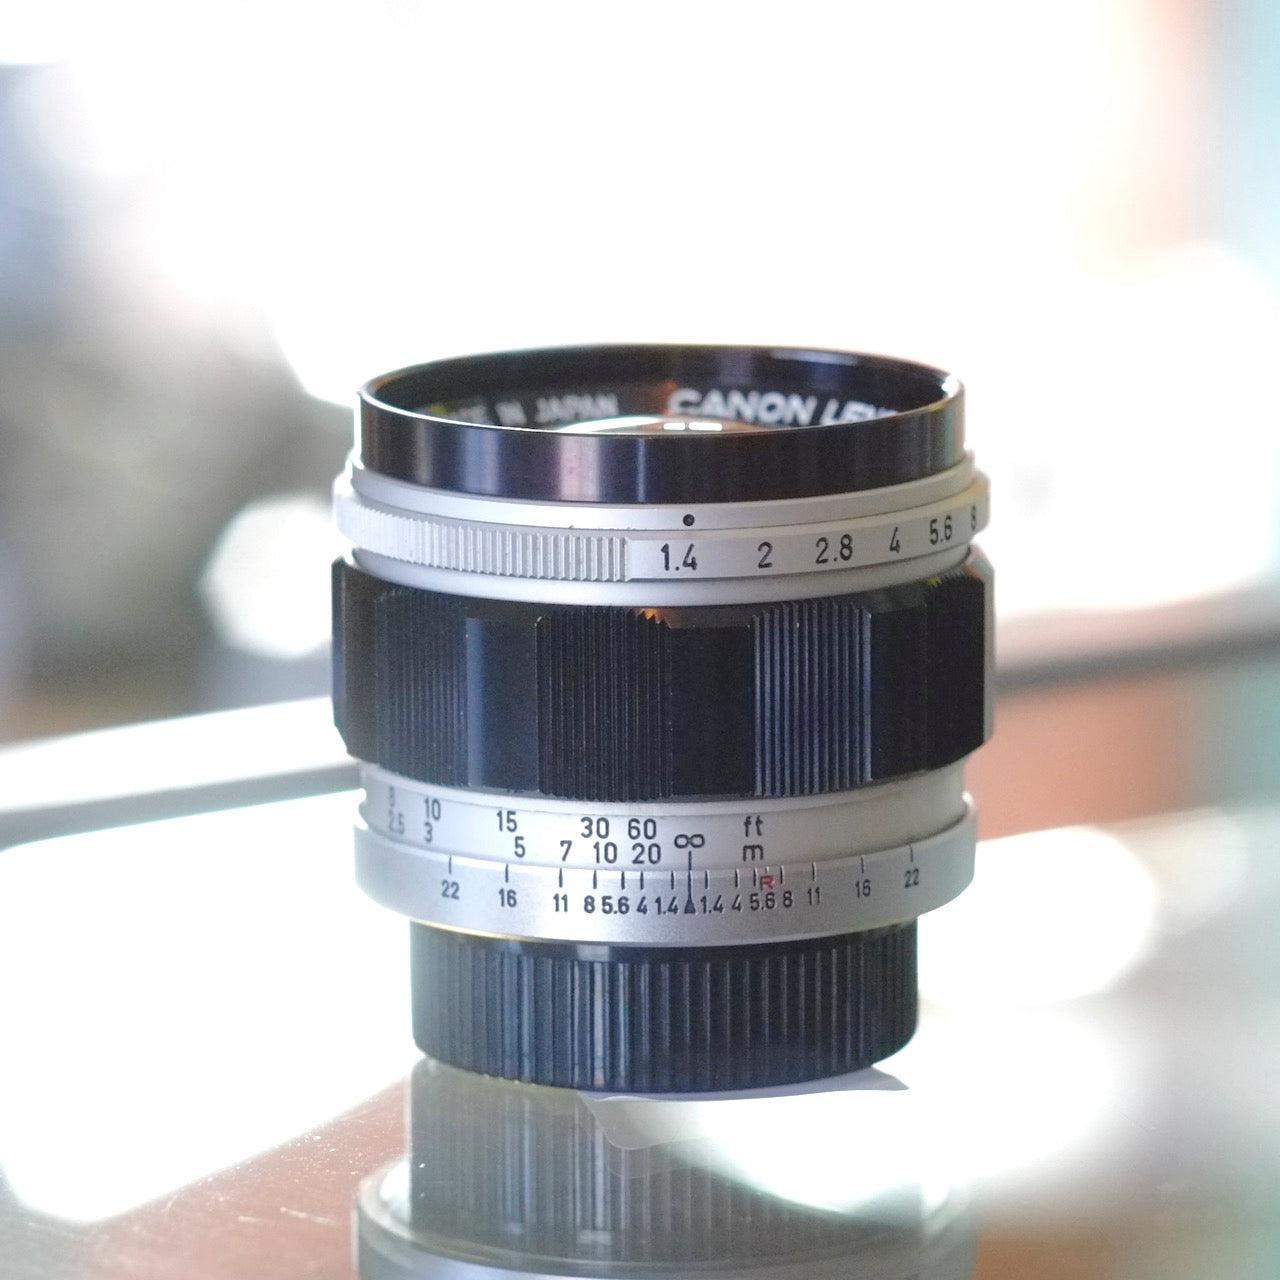 Canon 50mm f1.4 for LTM